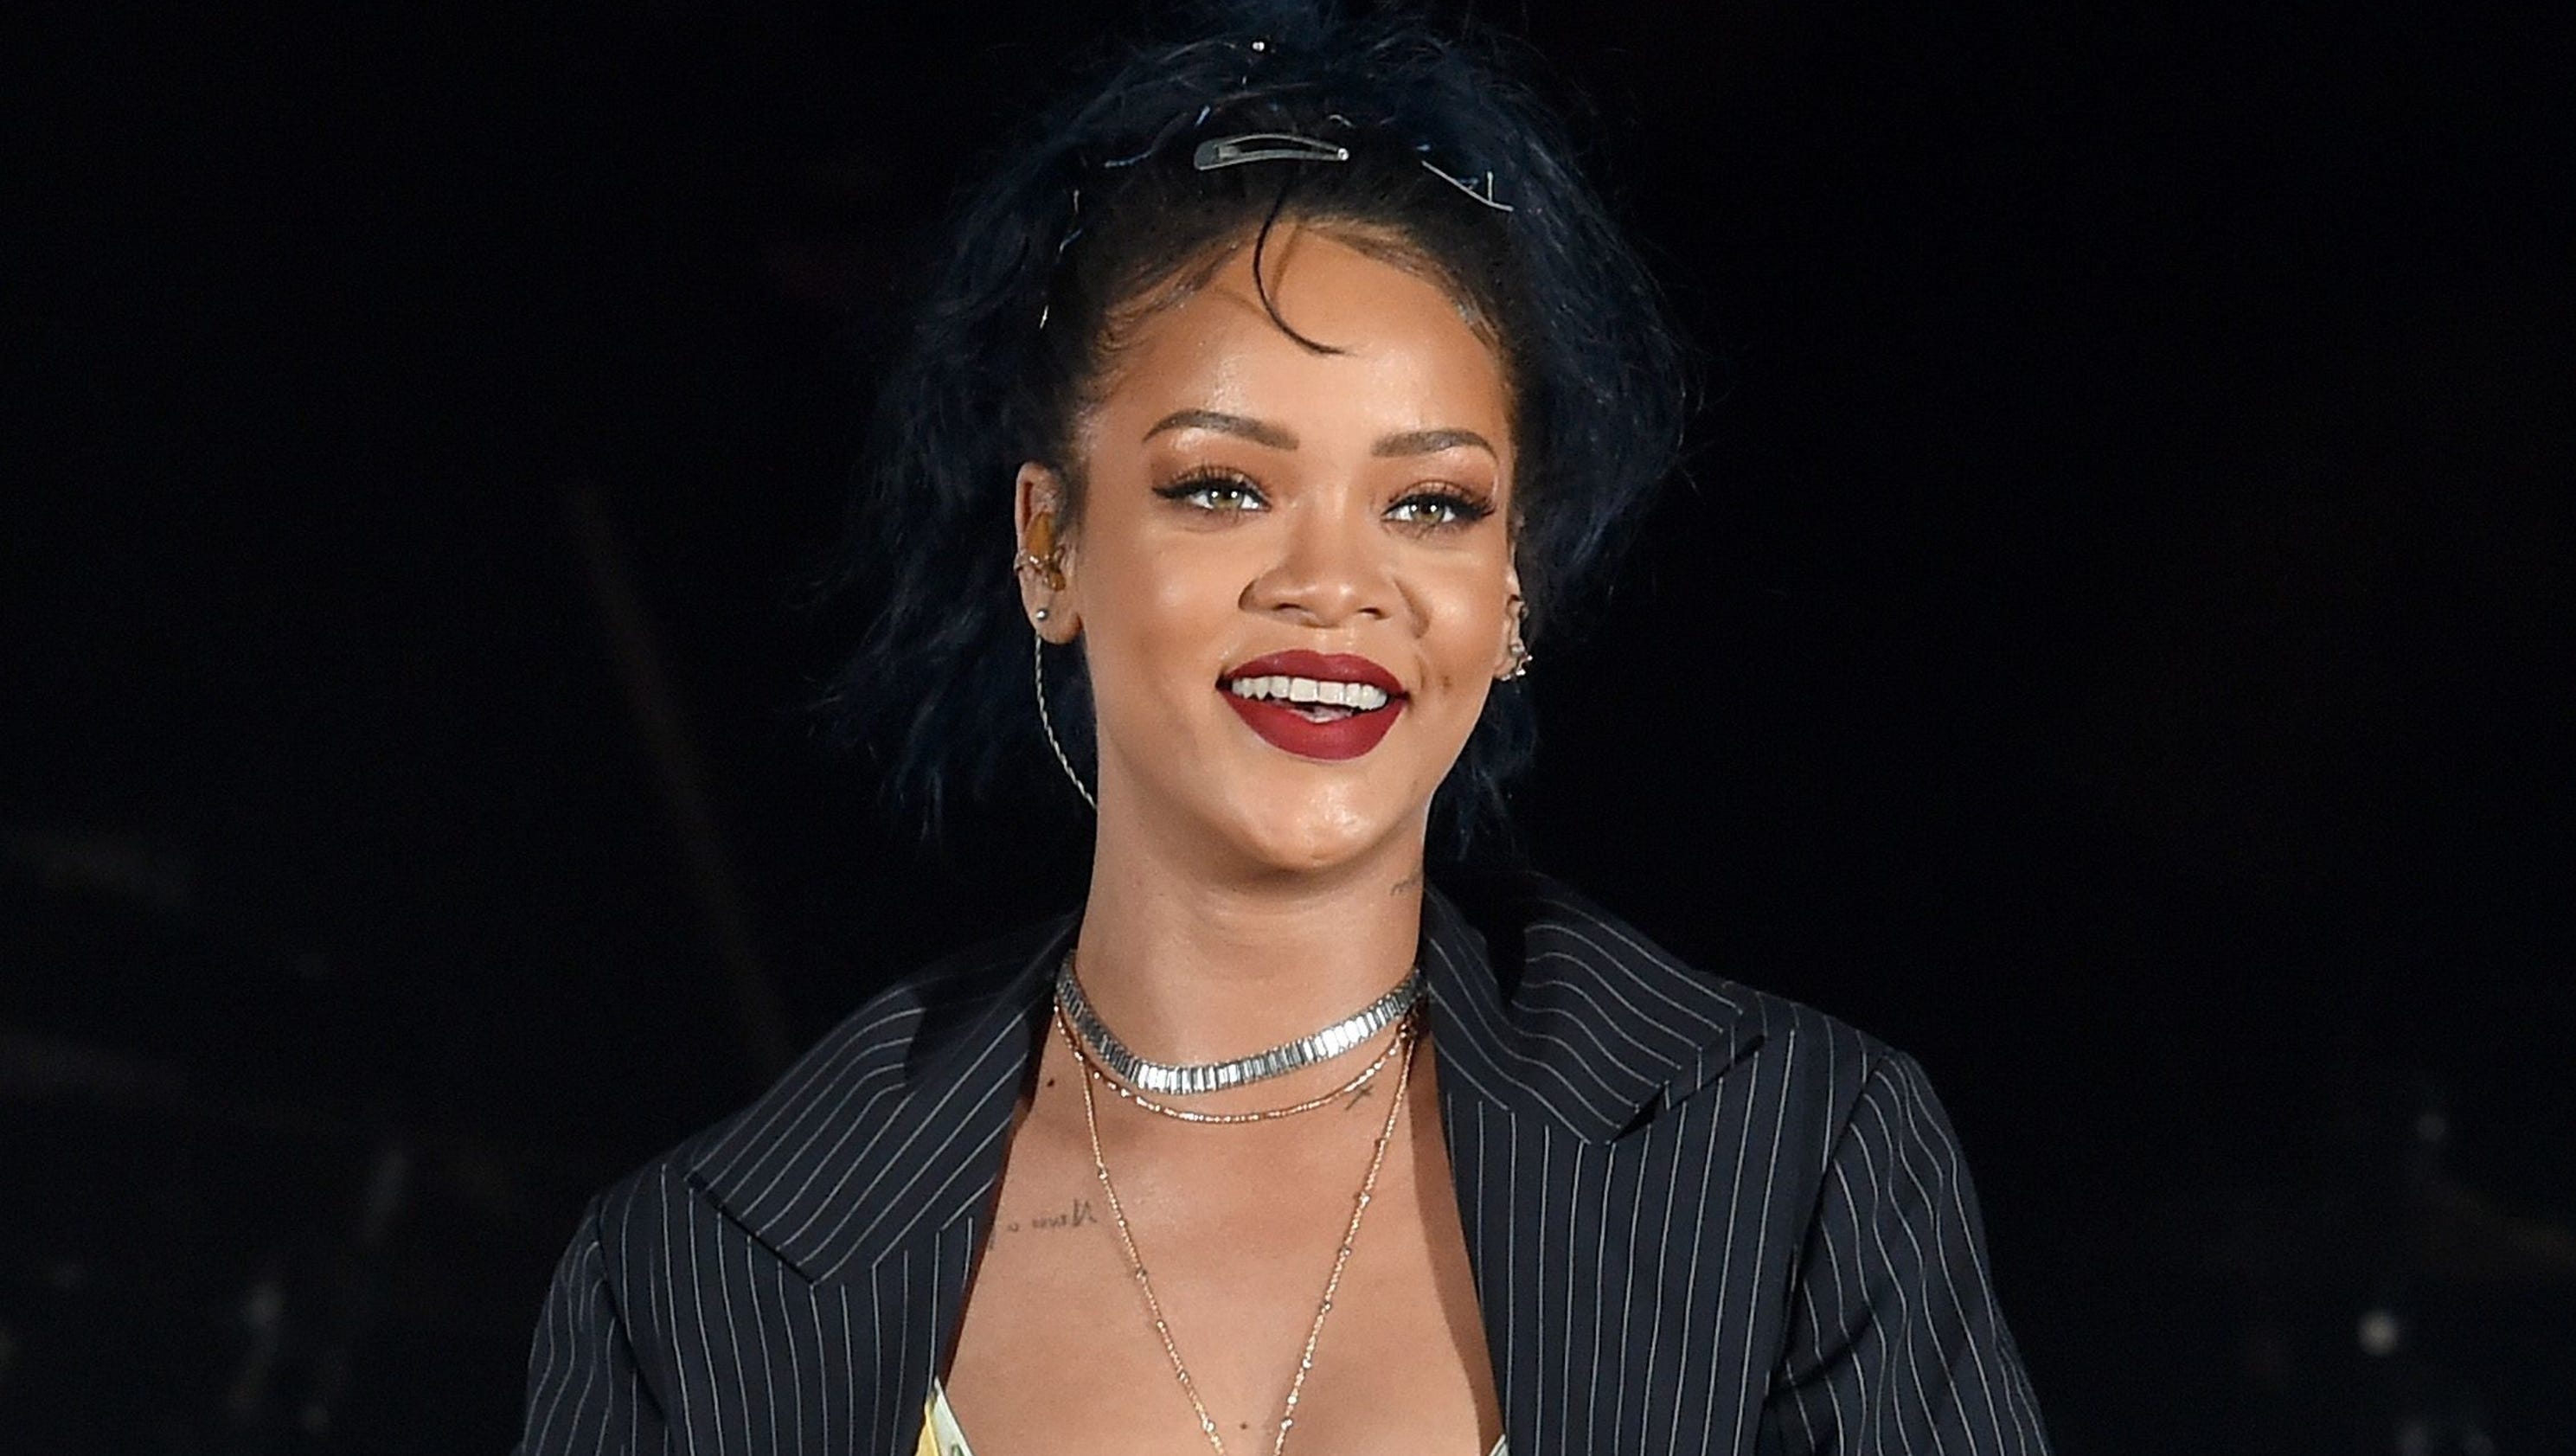 Who is Rihanna dating? The internet goes wild over singer's new man